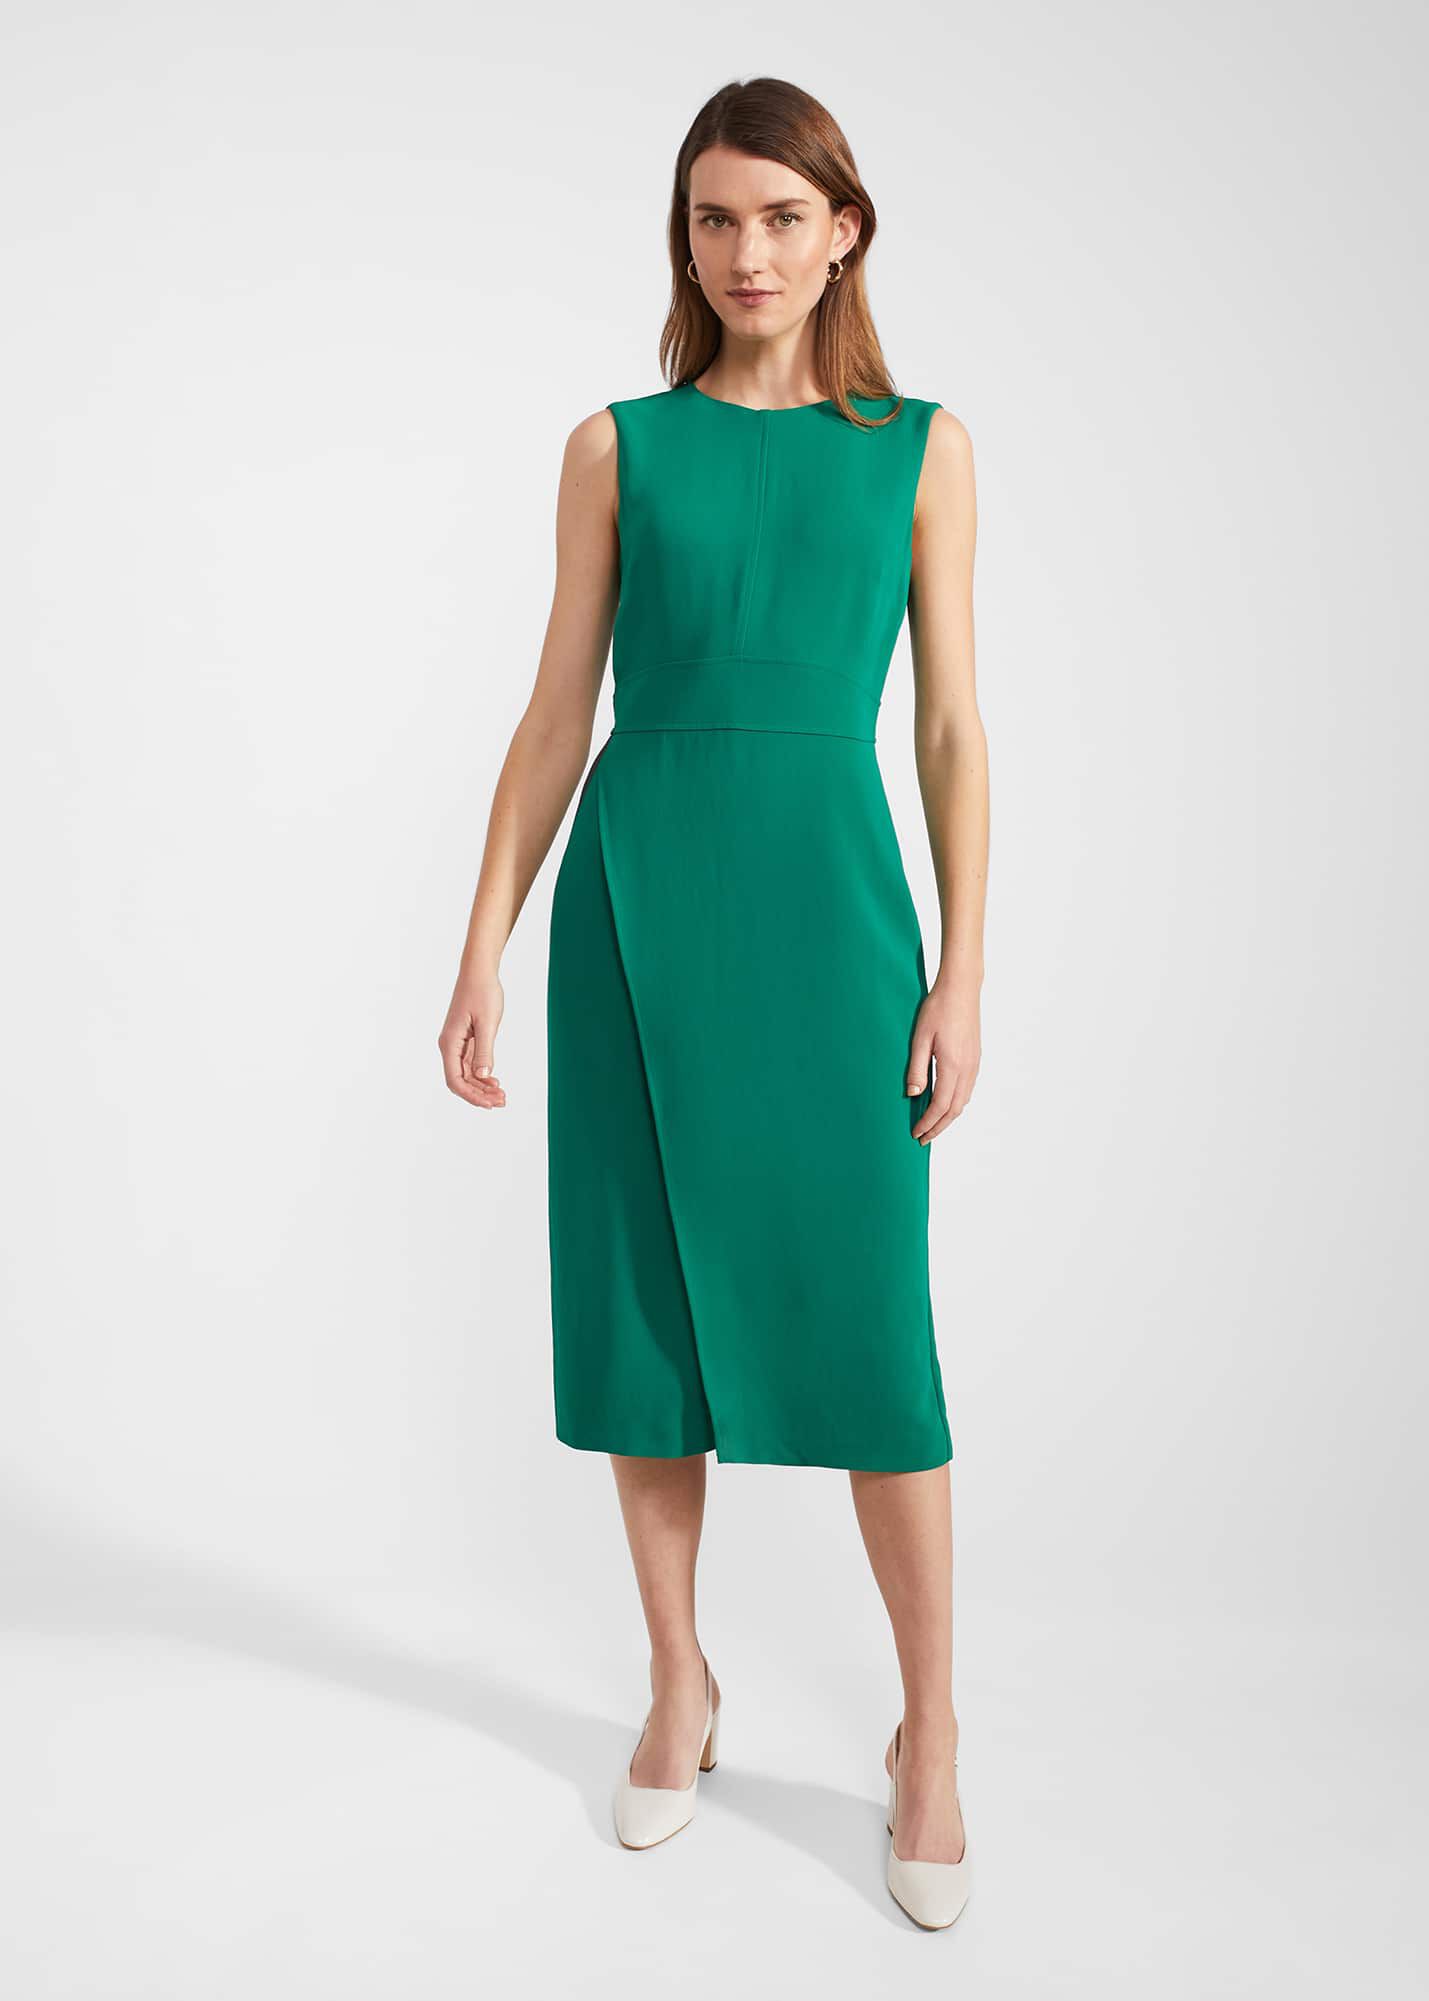 Best New Dresses, The Most Flattering Shapes, Hobbs London